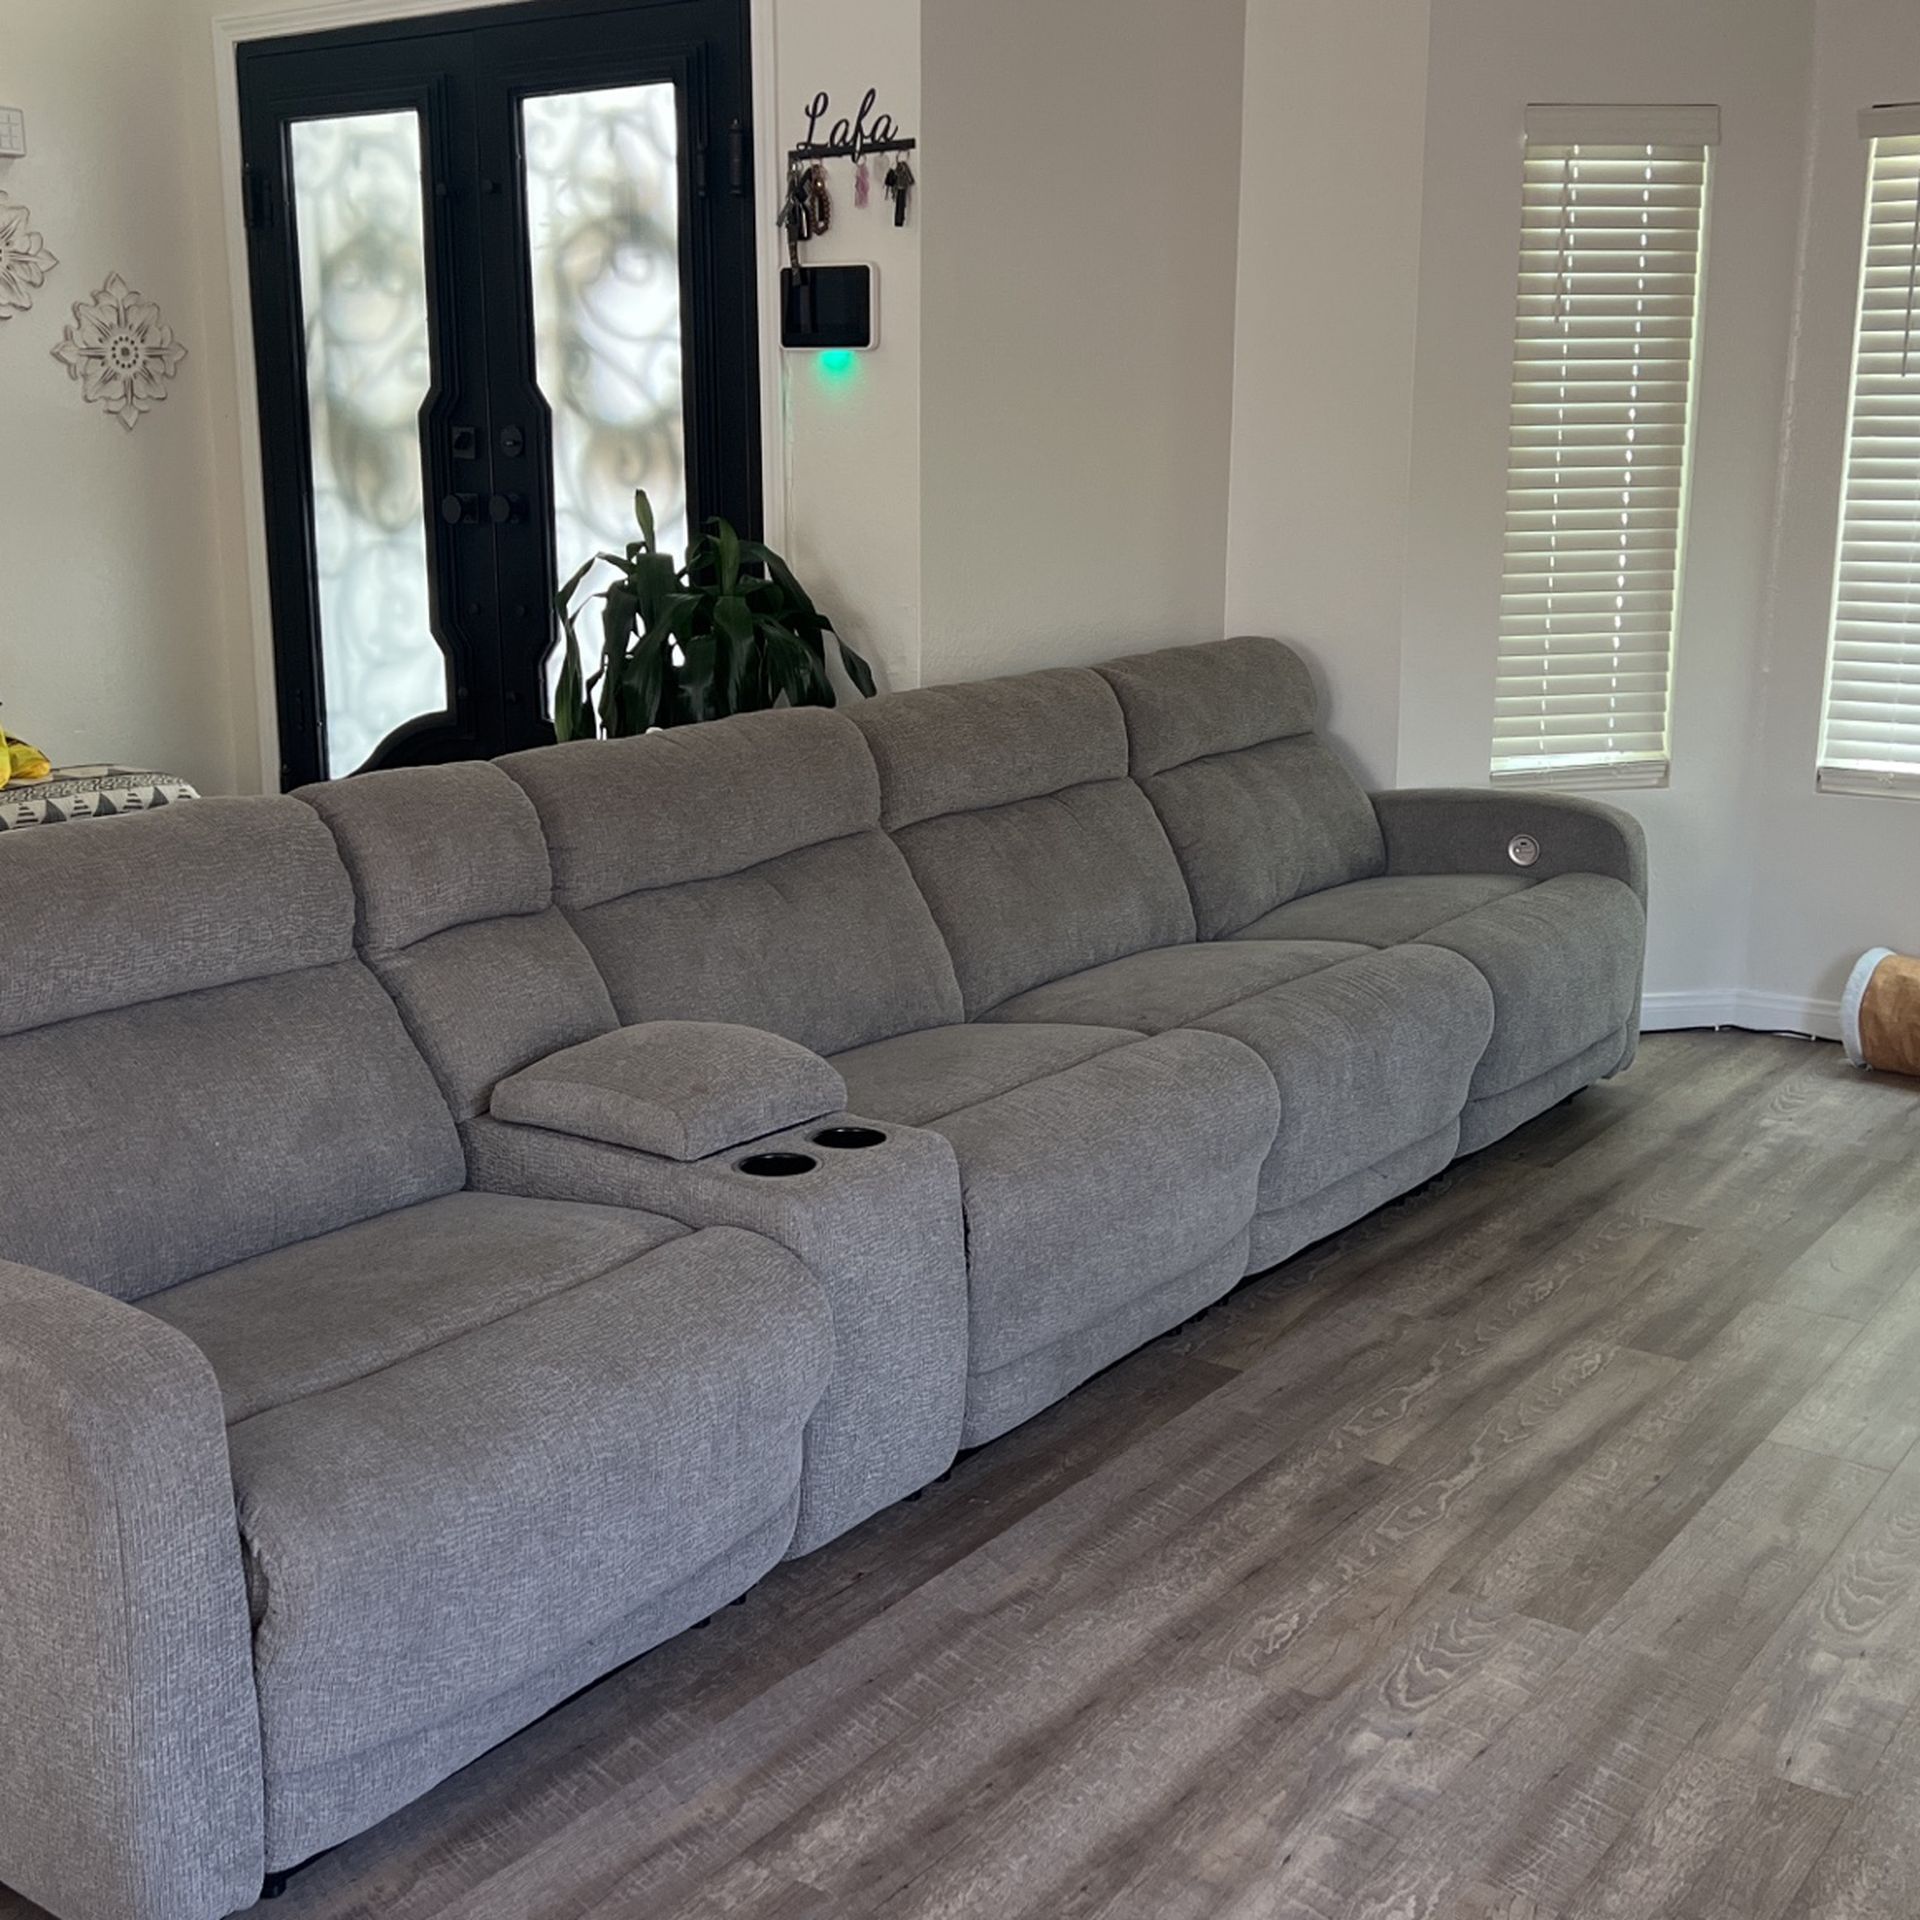 Grey Recliner Couch 